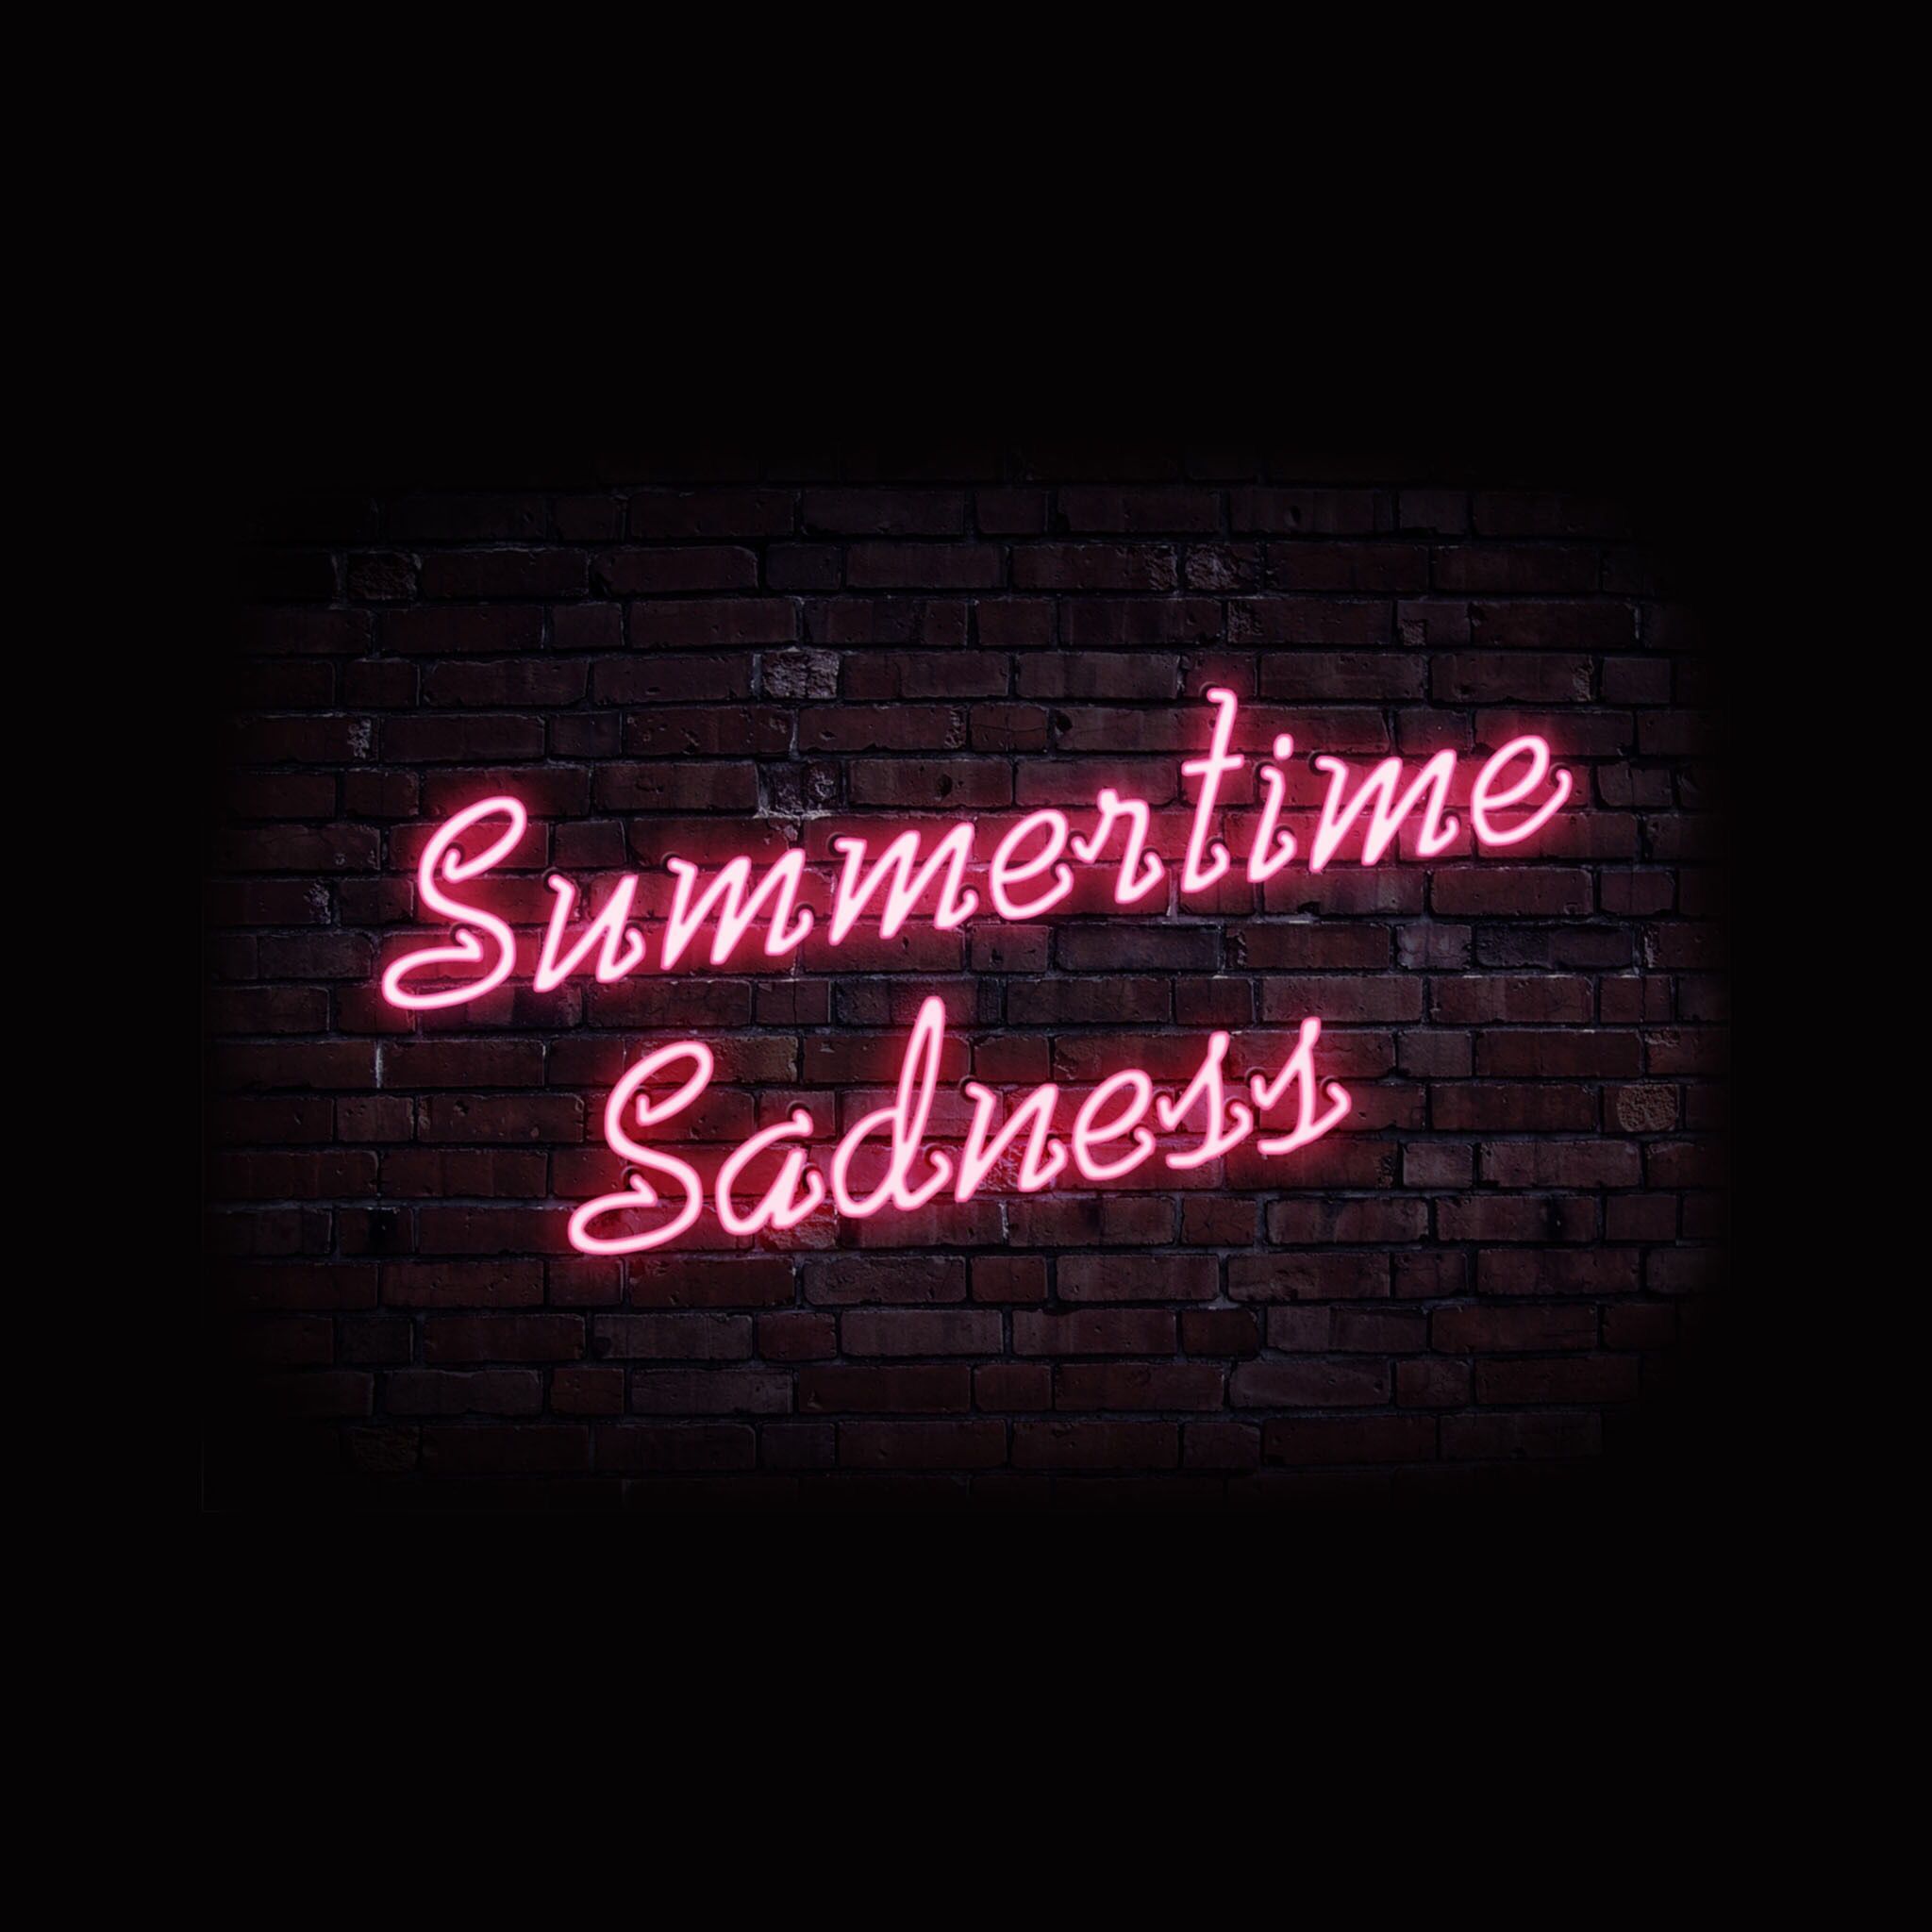 2048x2048 Summertime Sadness Character Aesthetic Pink Aesthetic Neon Sign Hd Wallpaper Background Download